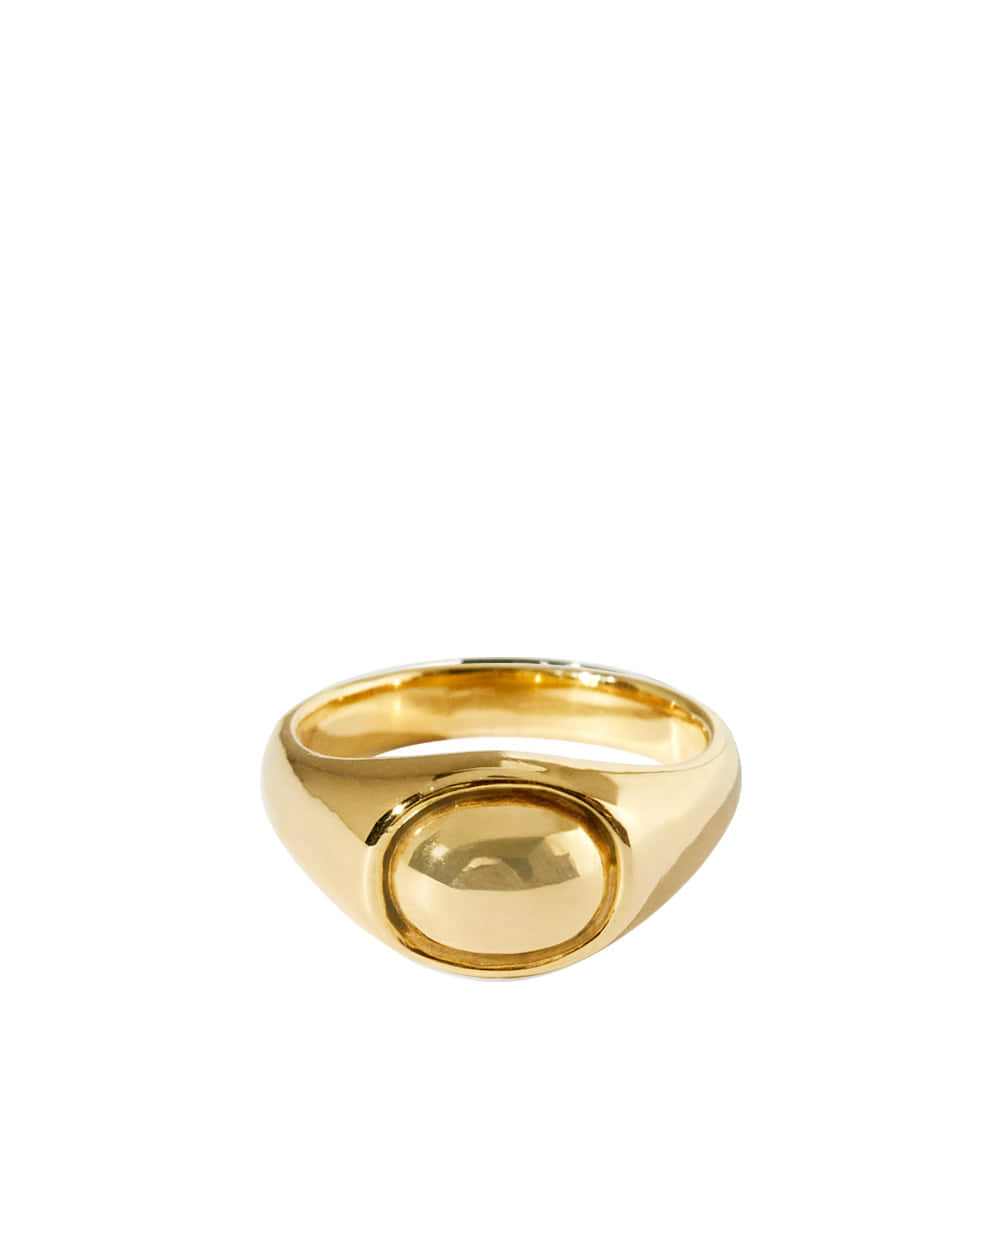 Noel silverstone ring_Gold / Gold